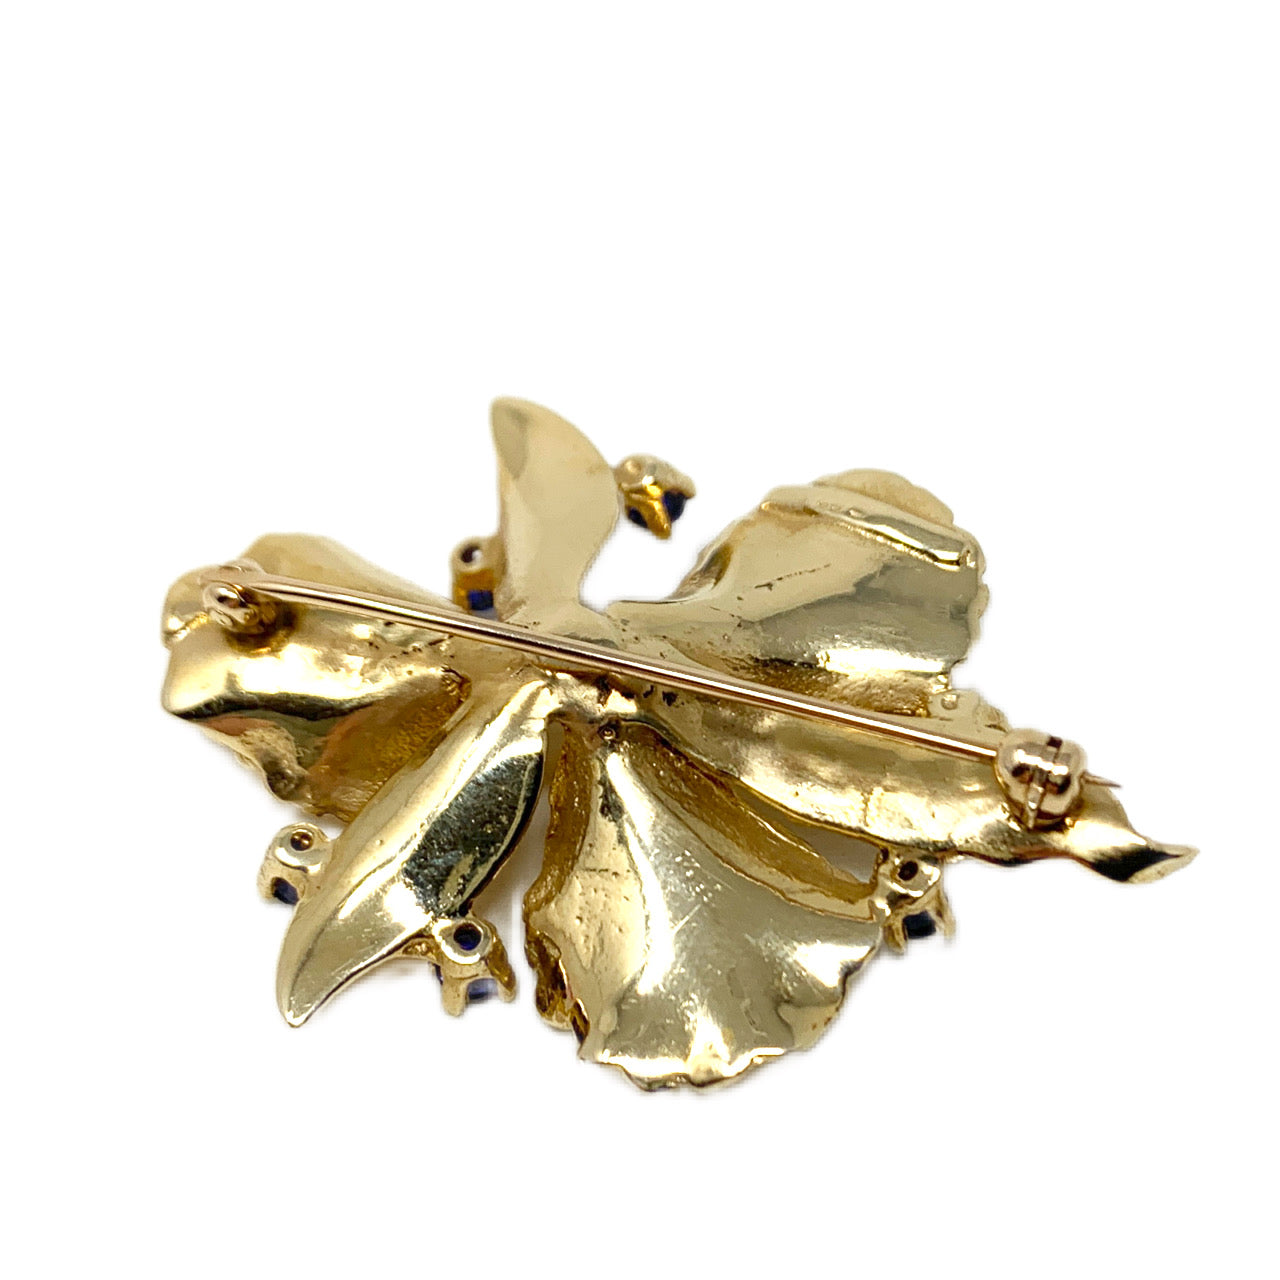 14K Gold Pearl & Sapphire Brushed Flower Brooch